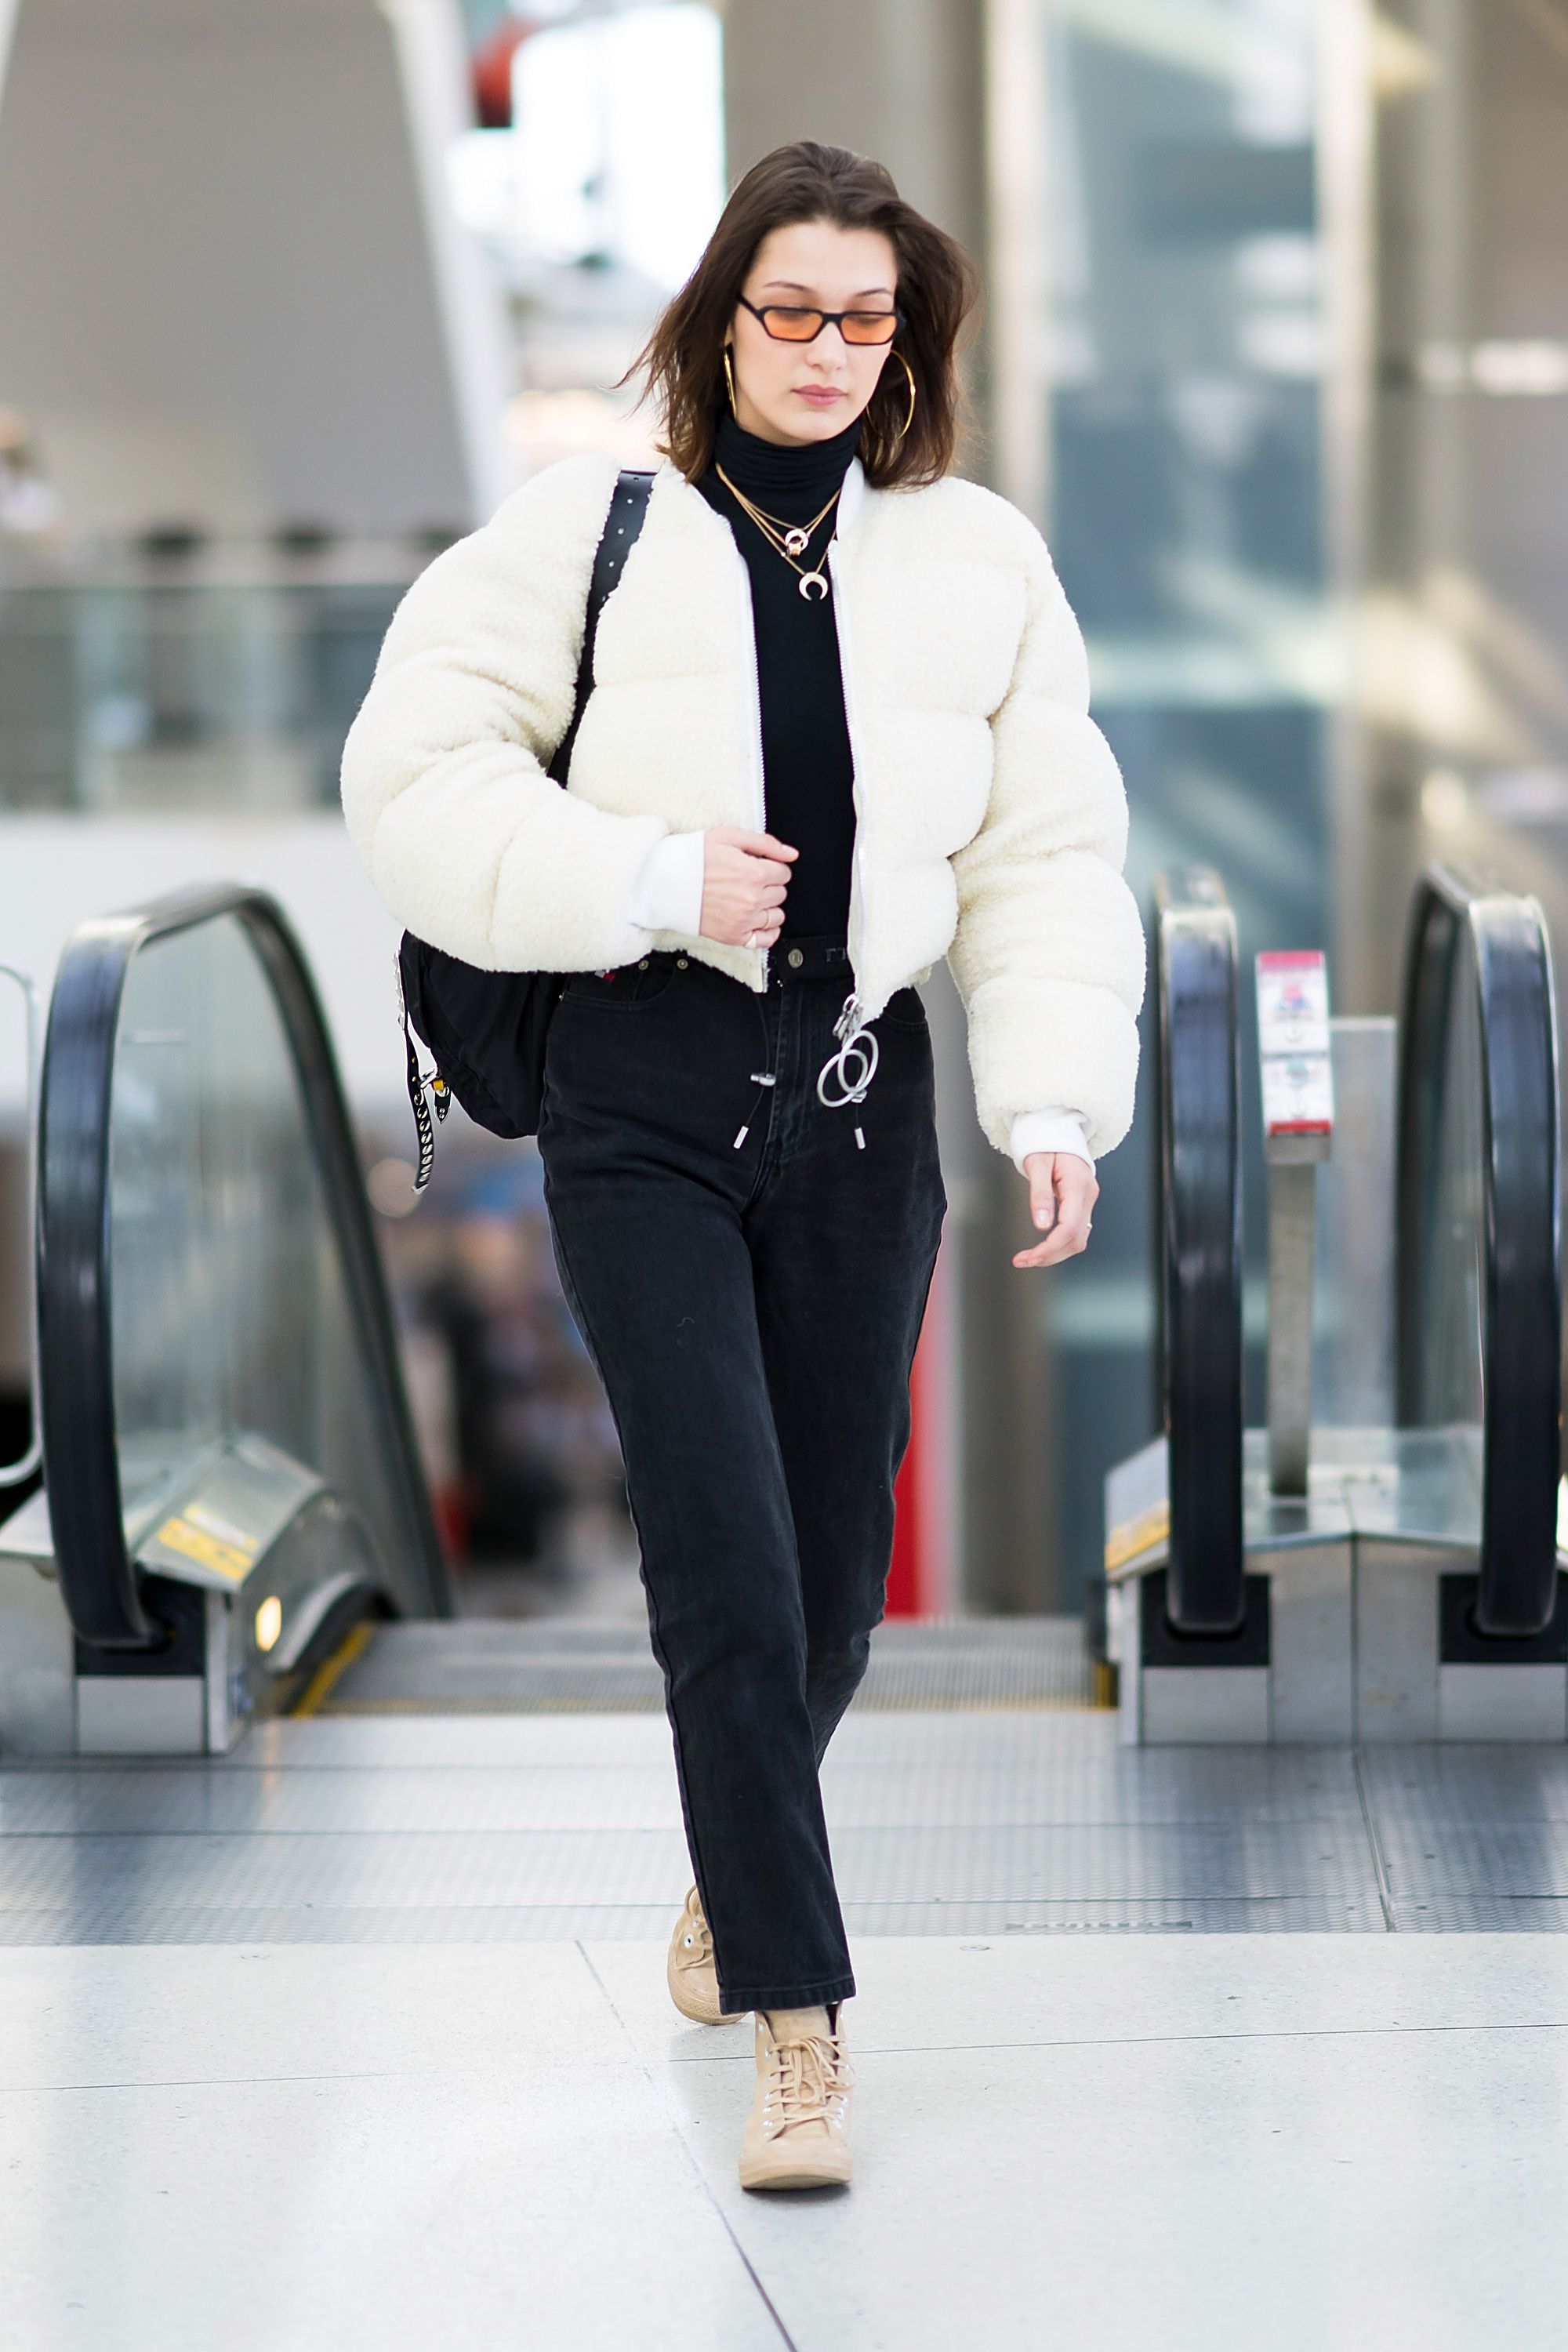 Celebrities Airport Style - Celebs Airport Fashion Photos